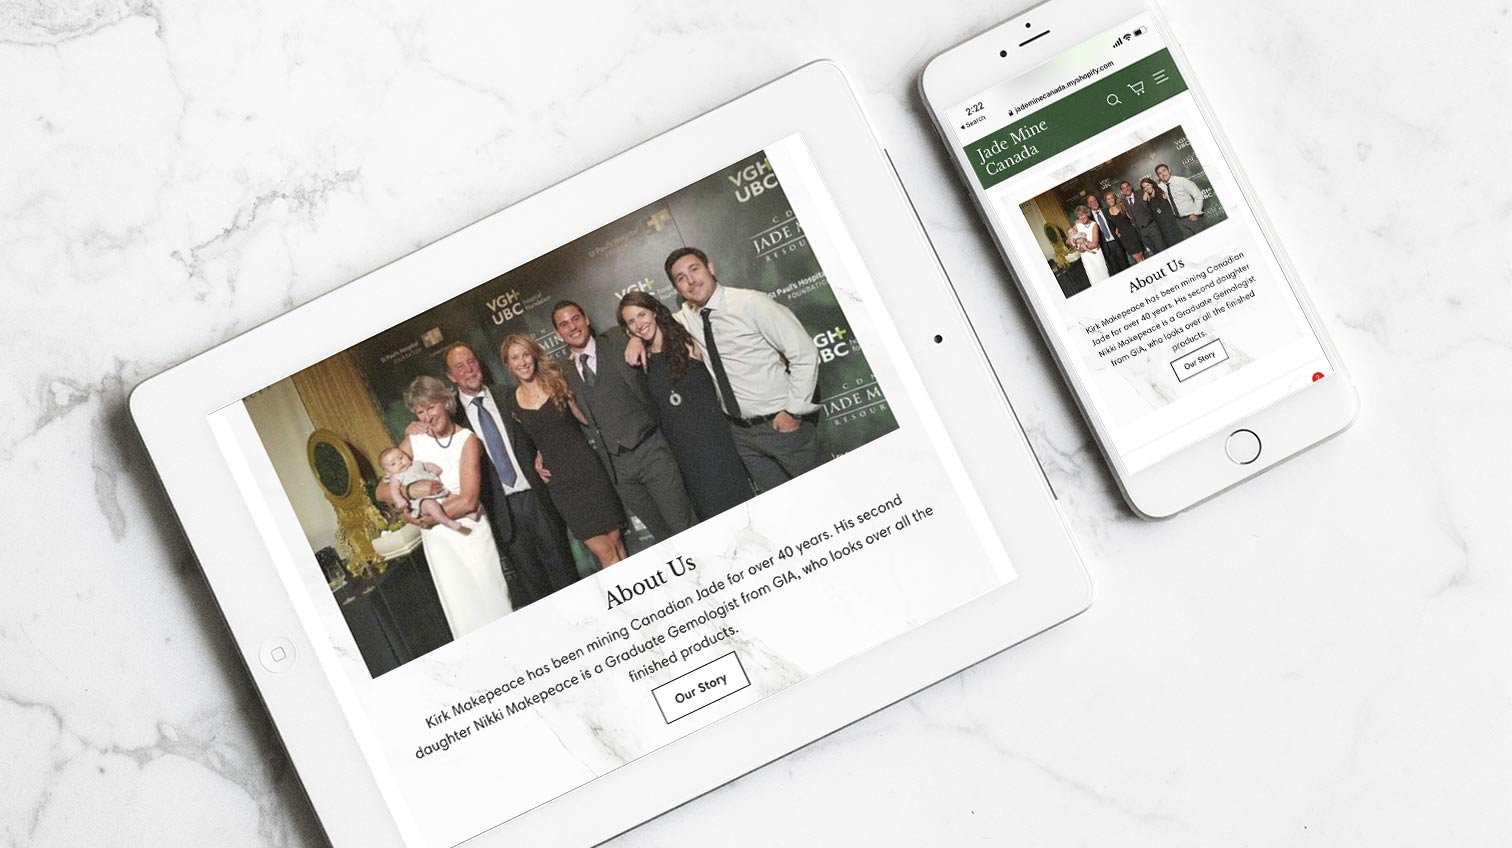 Tablet and mobile phone view of Jade Mine Canada's Shopify storefront.